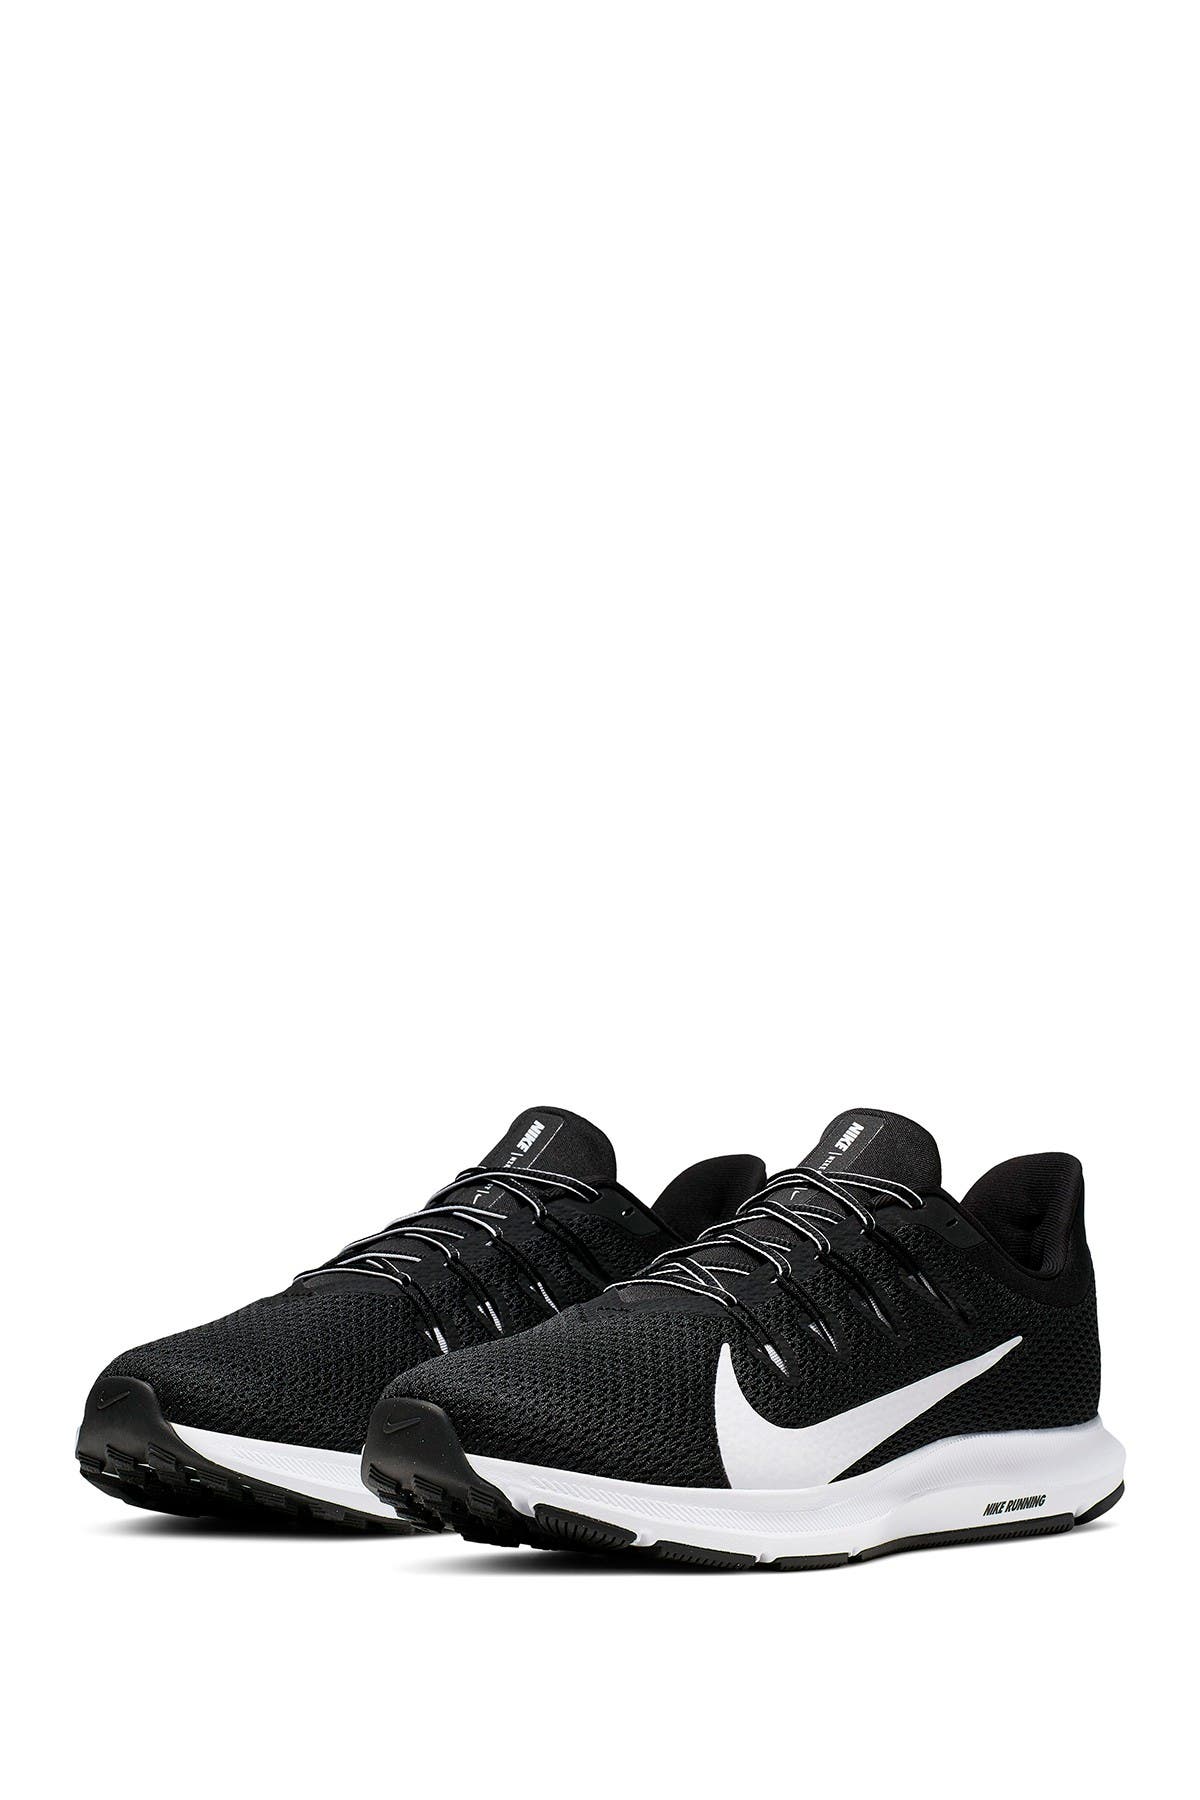 nike zoom quest 2